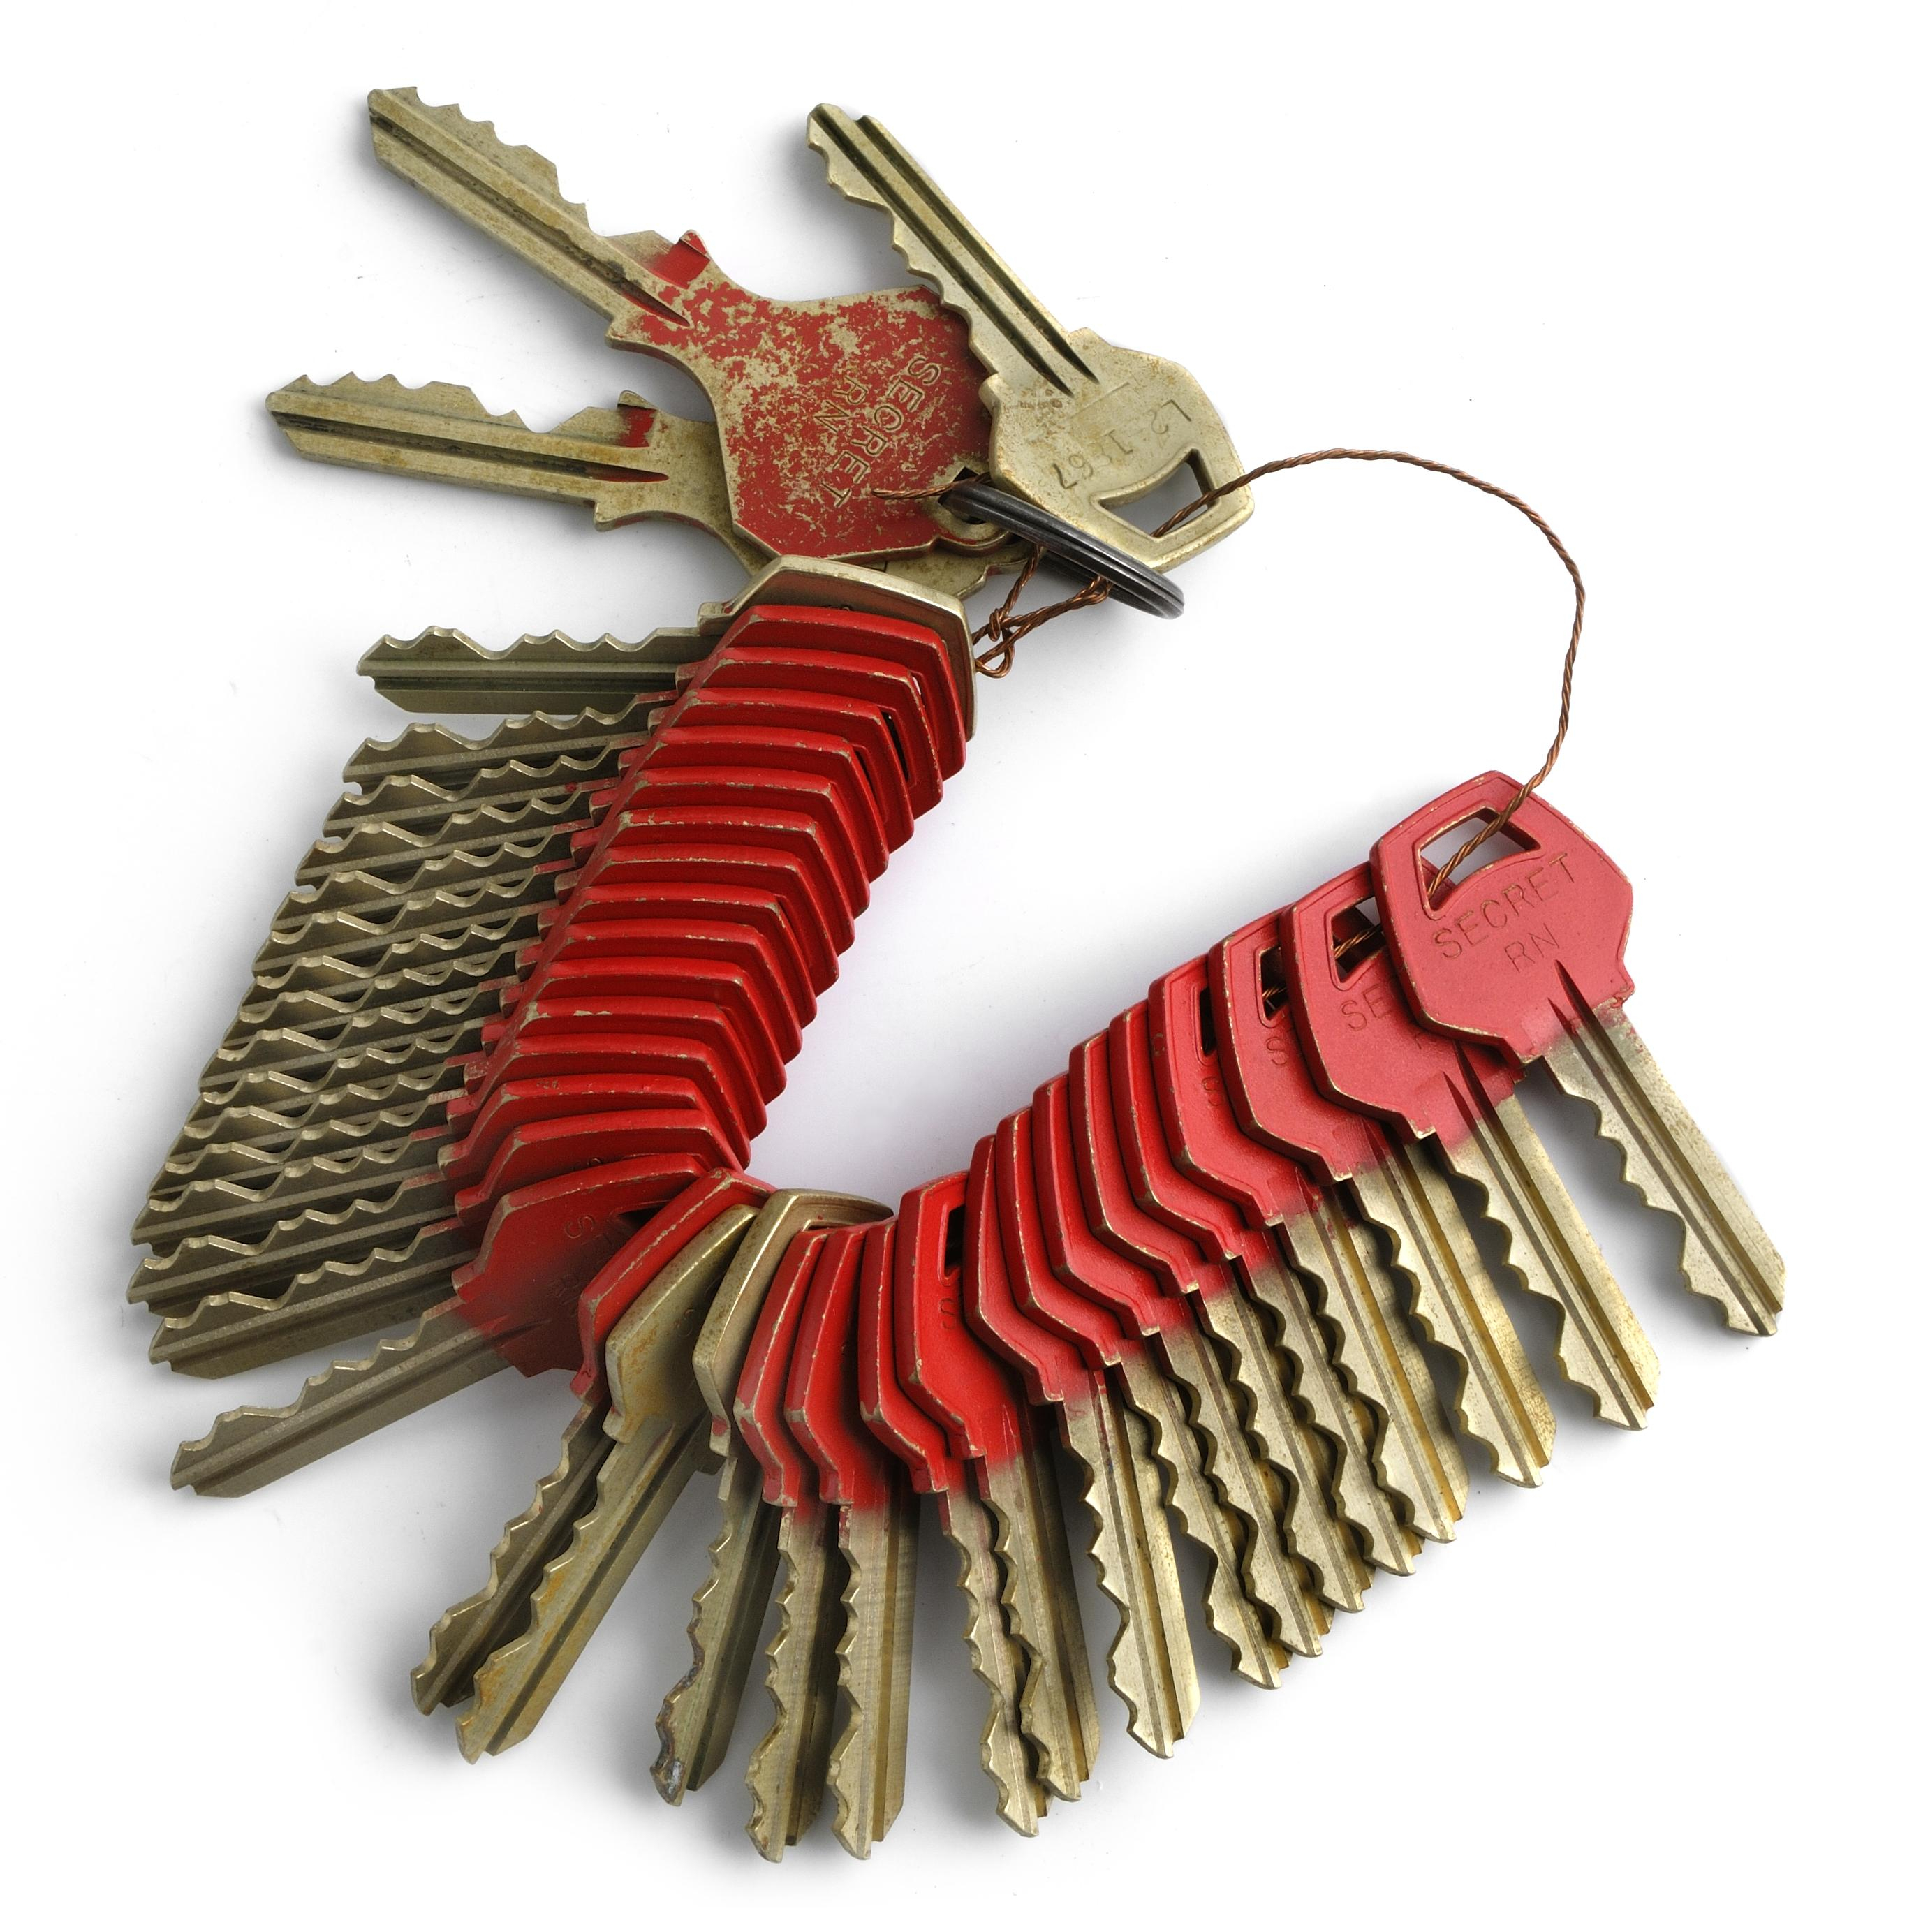 A set of keys used in the activation of nuclear weaponry Credit NMRN